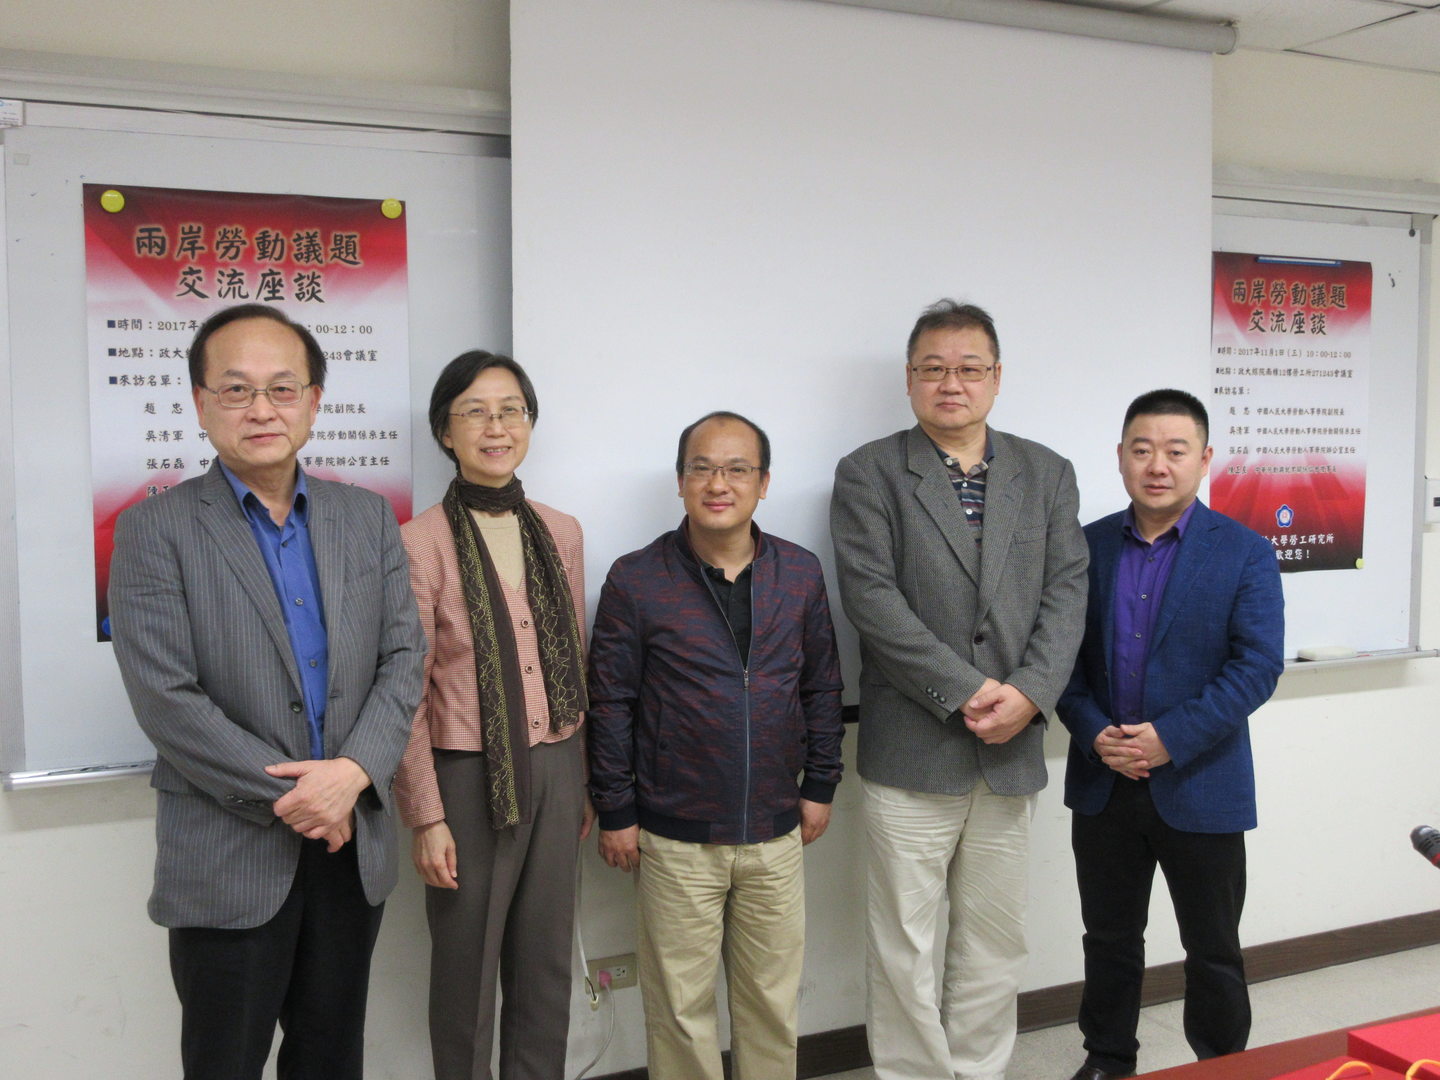 Symposium of Mainland China and Taiwan on Labor Issue(106.11.01)